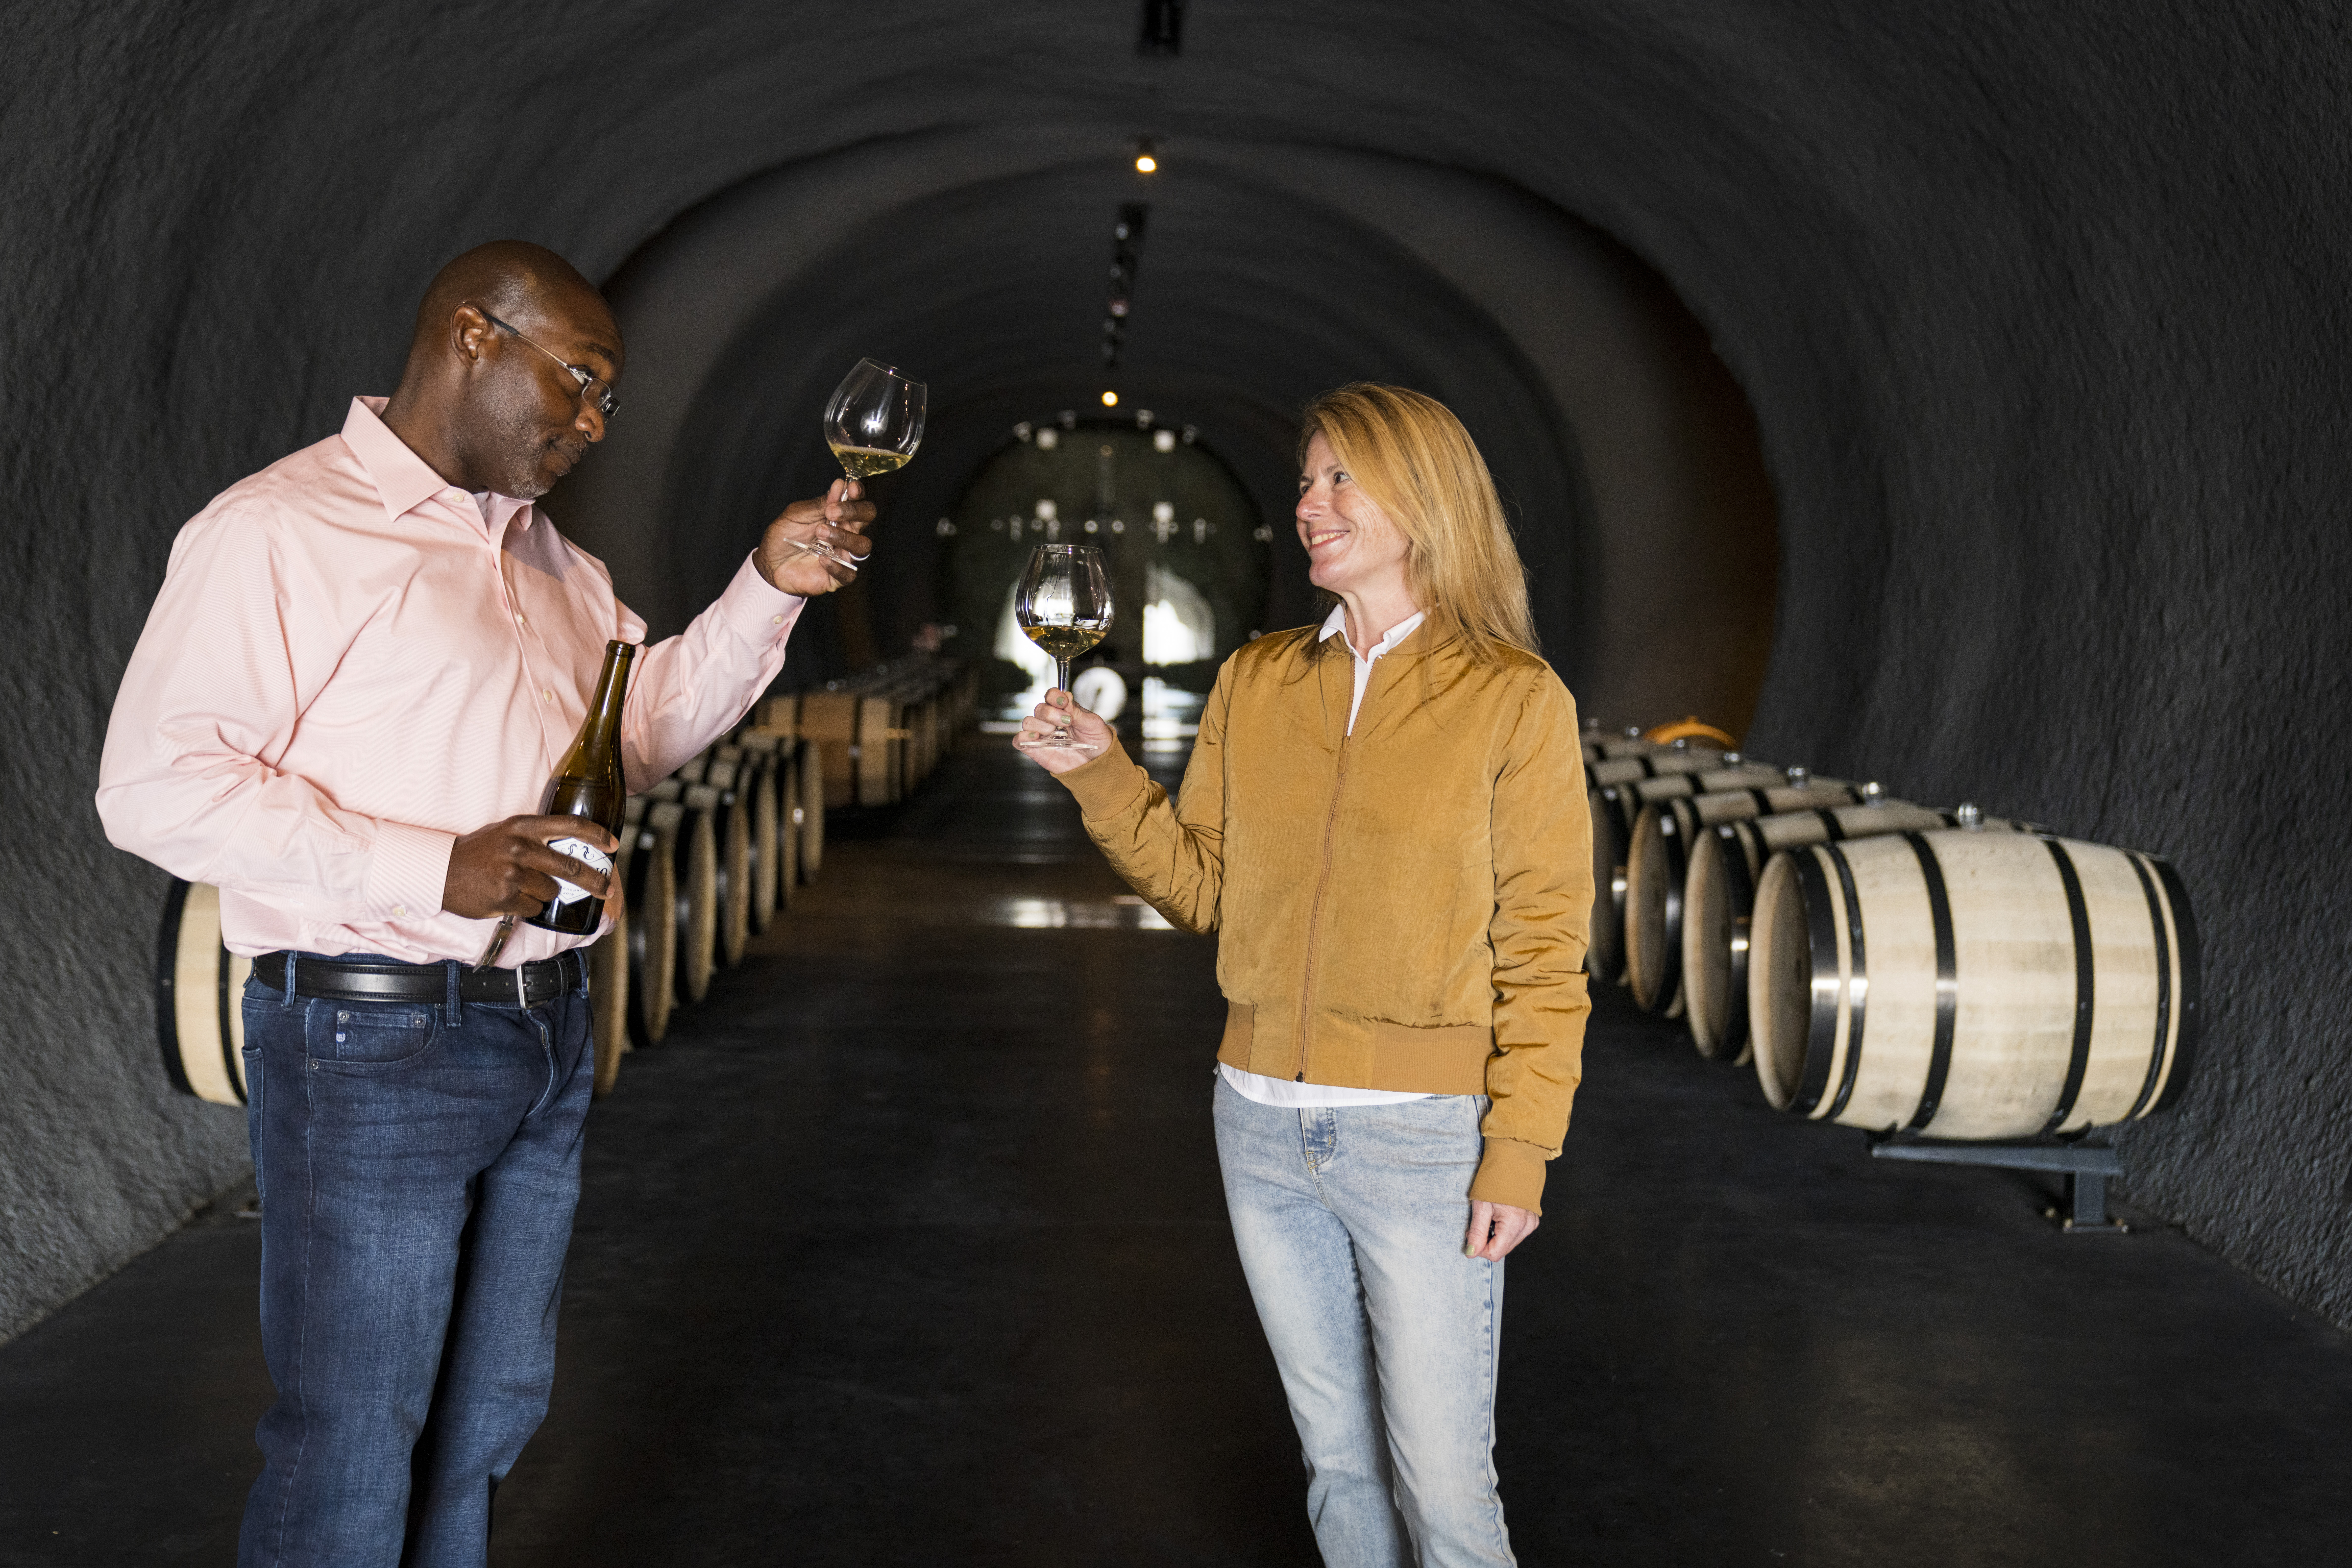 This is an image of female winemaker, Rachel Martin, founder of our California wine company, and Marbue Marke cheering/raising classes in winery. The image is shown in conjunction with our blog post about our socially responsible wine company and how it supports other women in need.